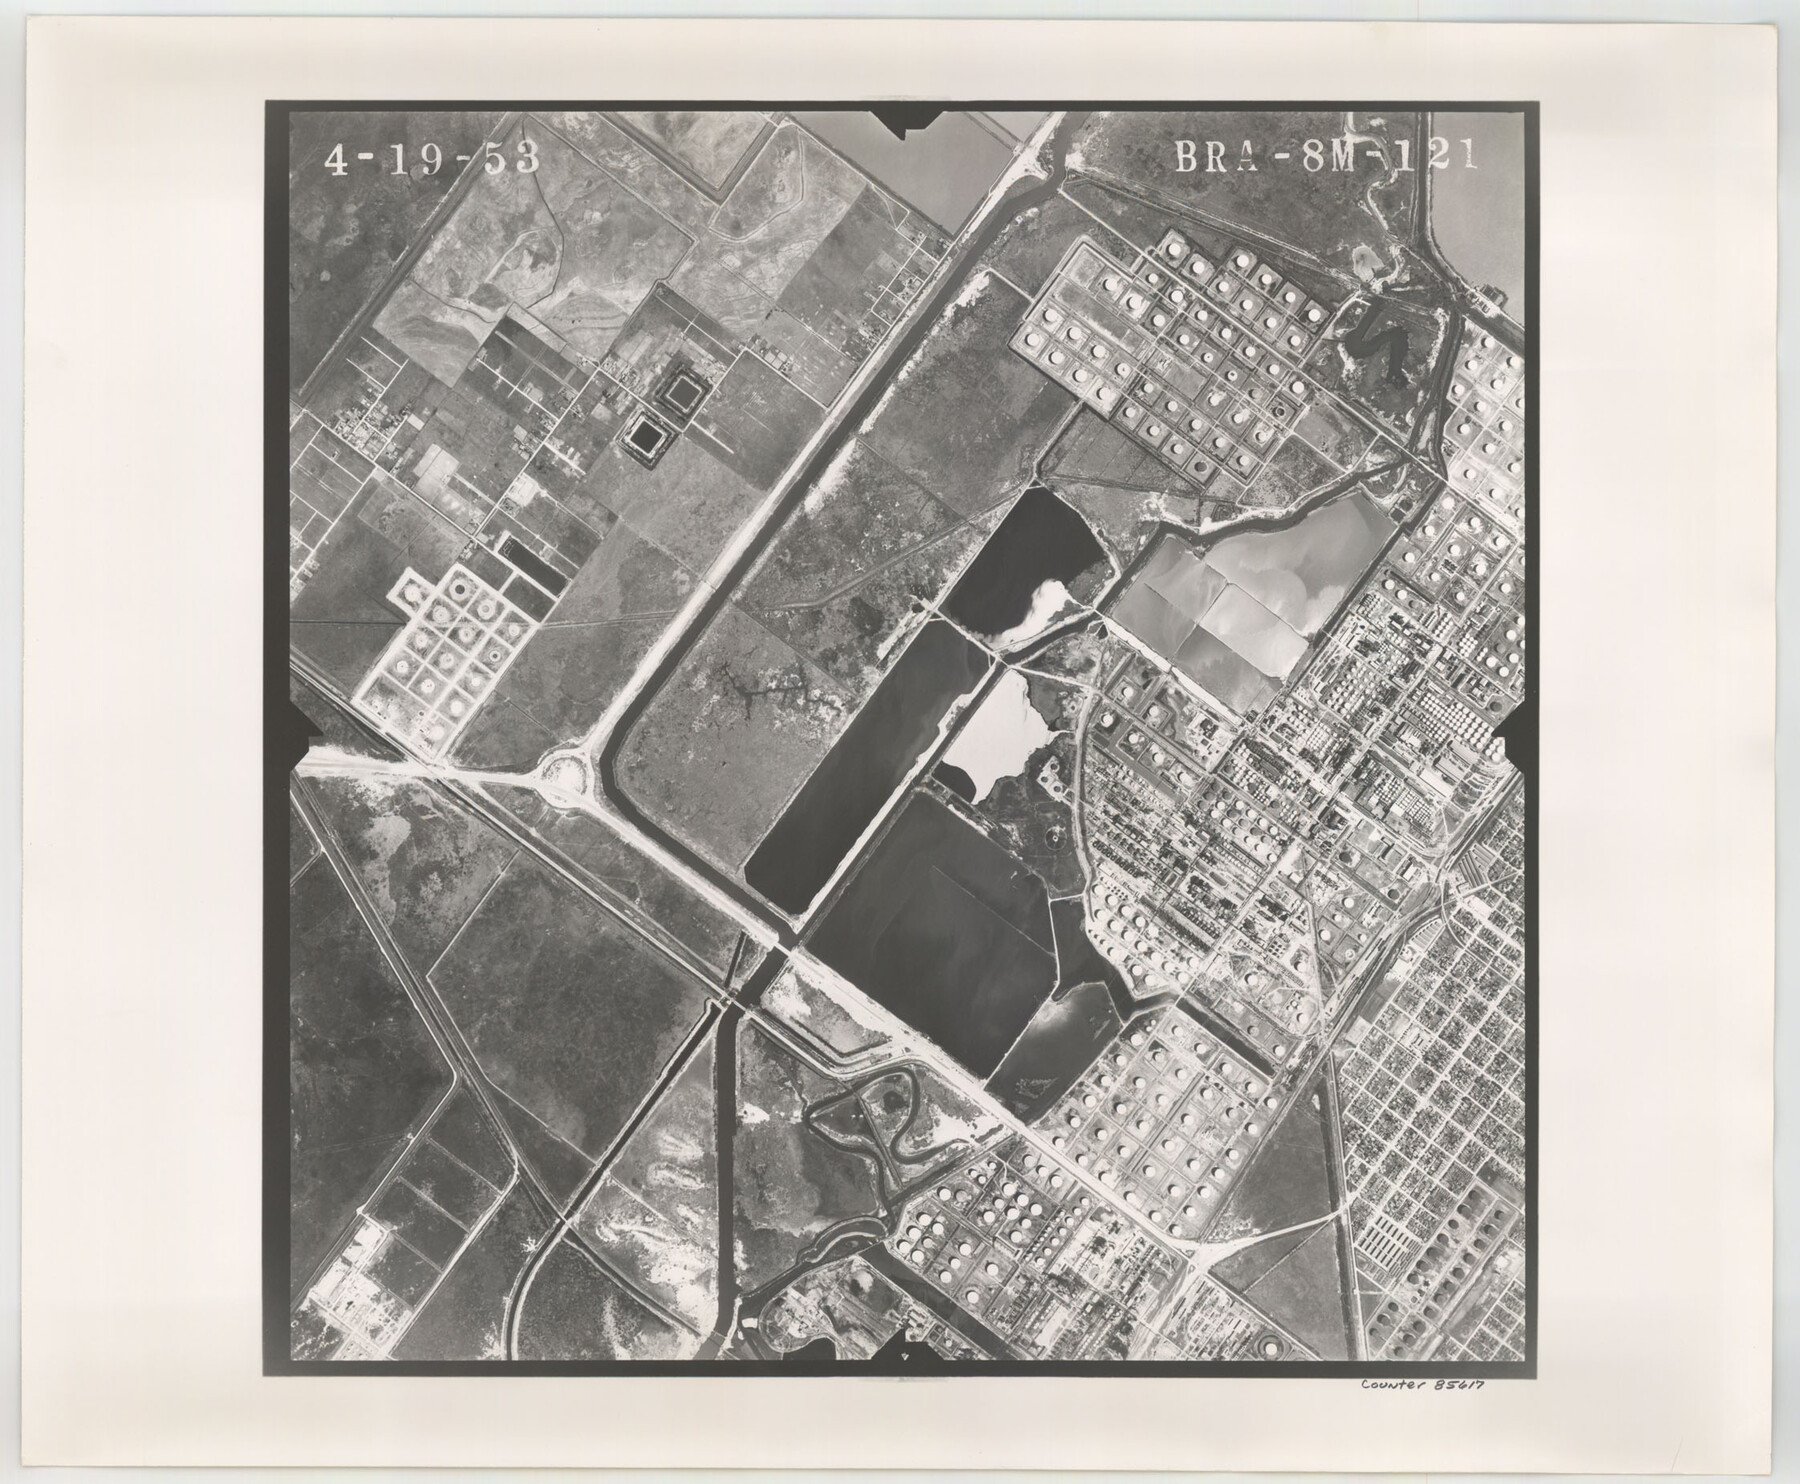 85617, Flight Mission No. BRA-8M, Frame 121, Jefferson County, General Map Collection